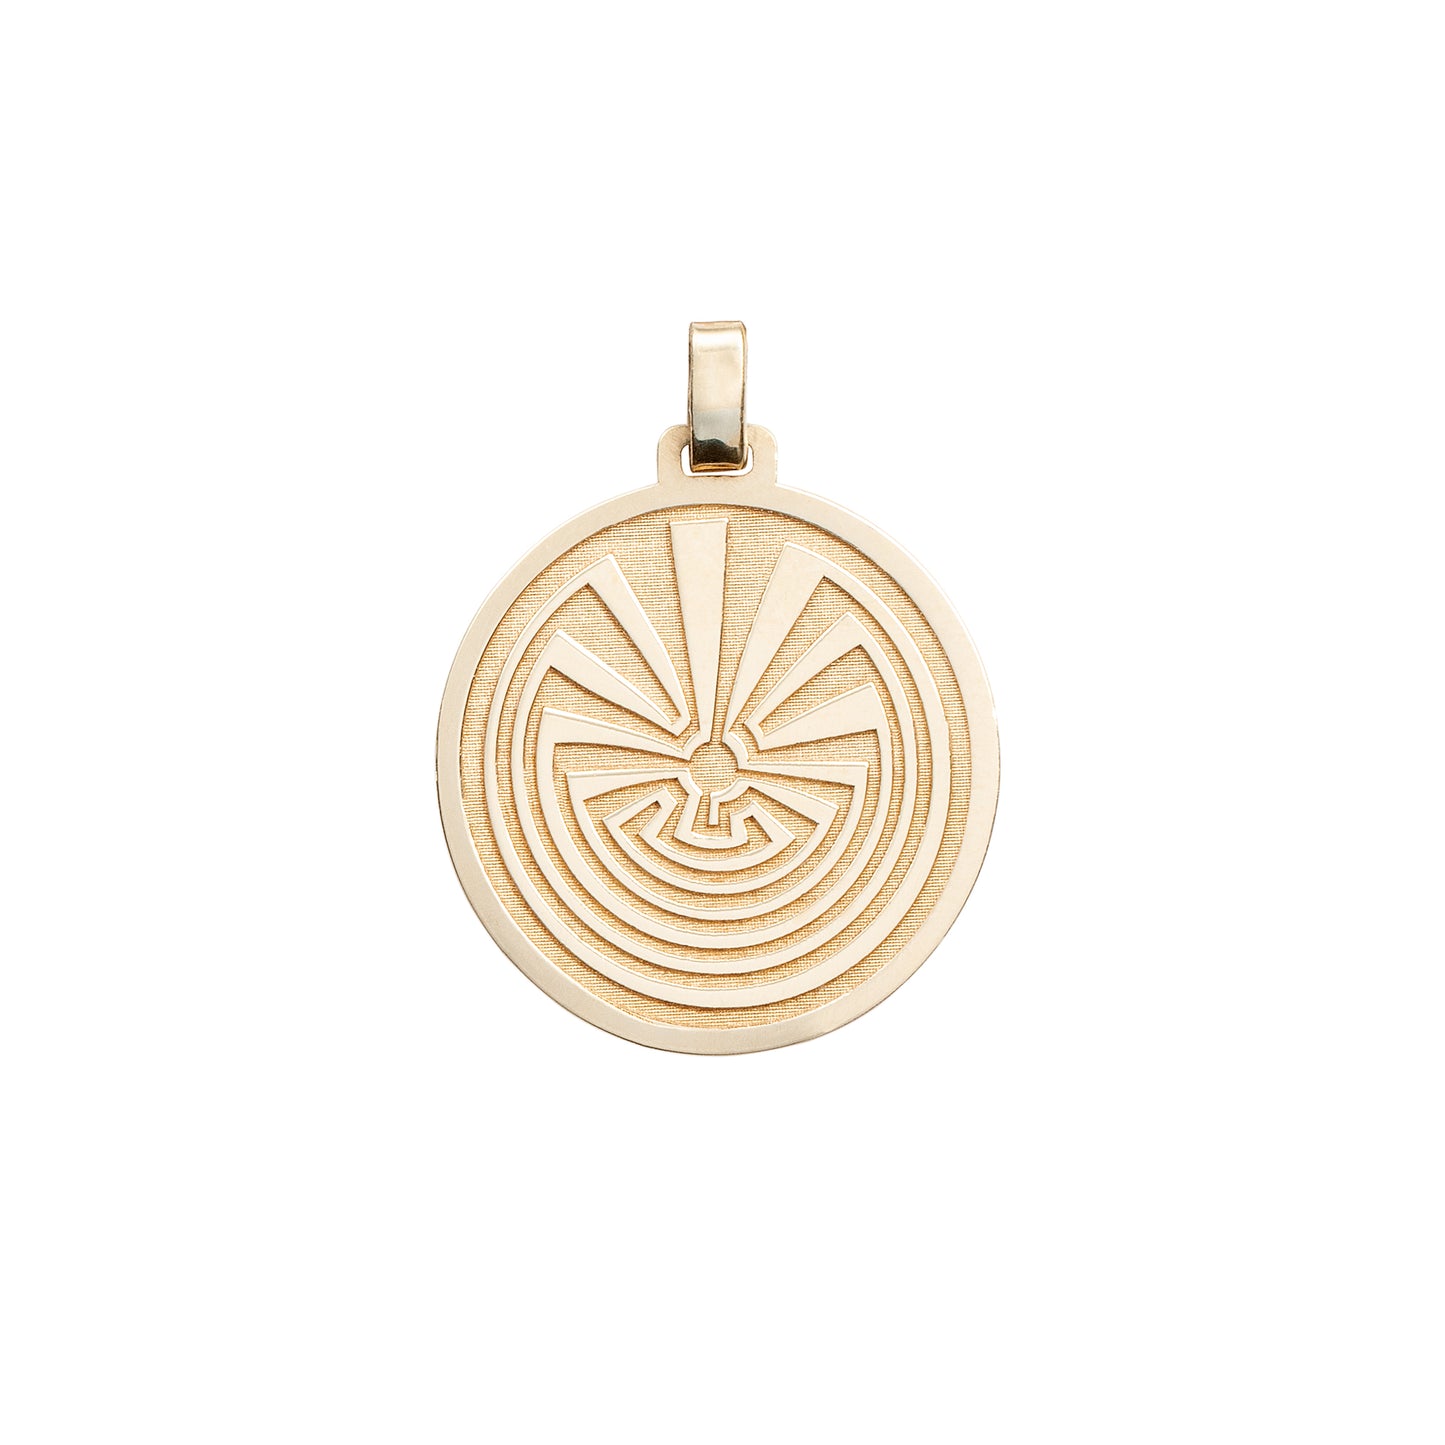 The Man in The Maze Necklace